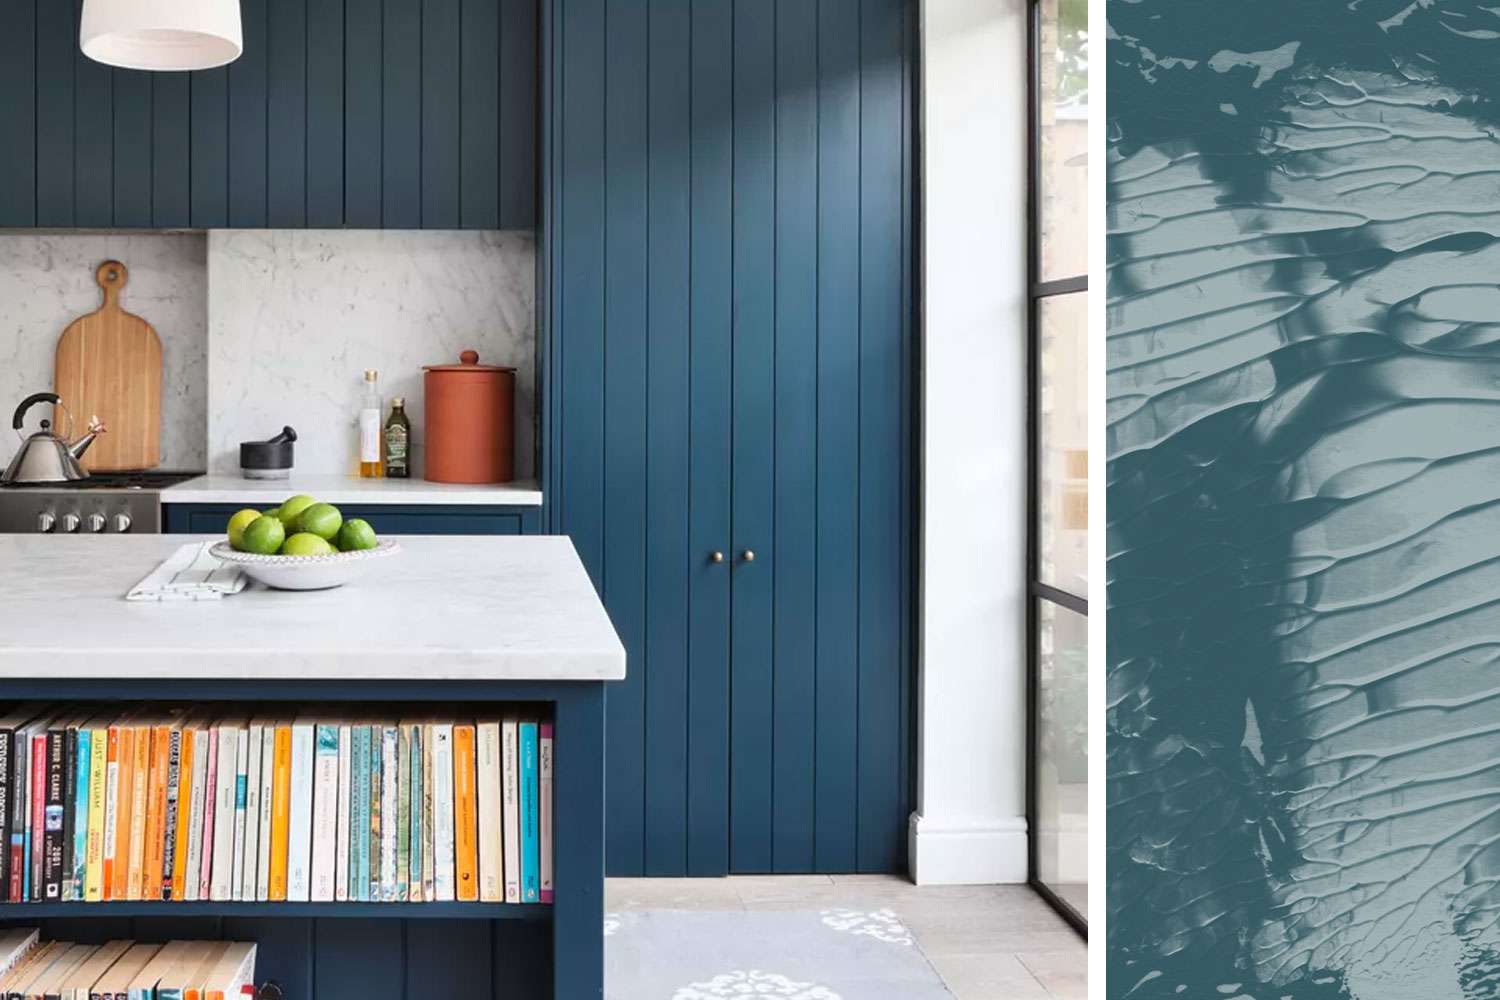  A kitchen with blue cabinets and a bookshelf. Clare Deep Dive